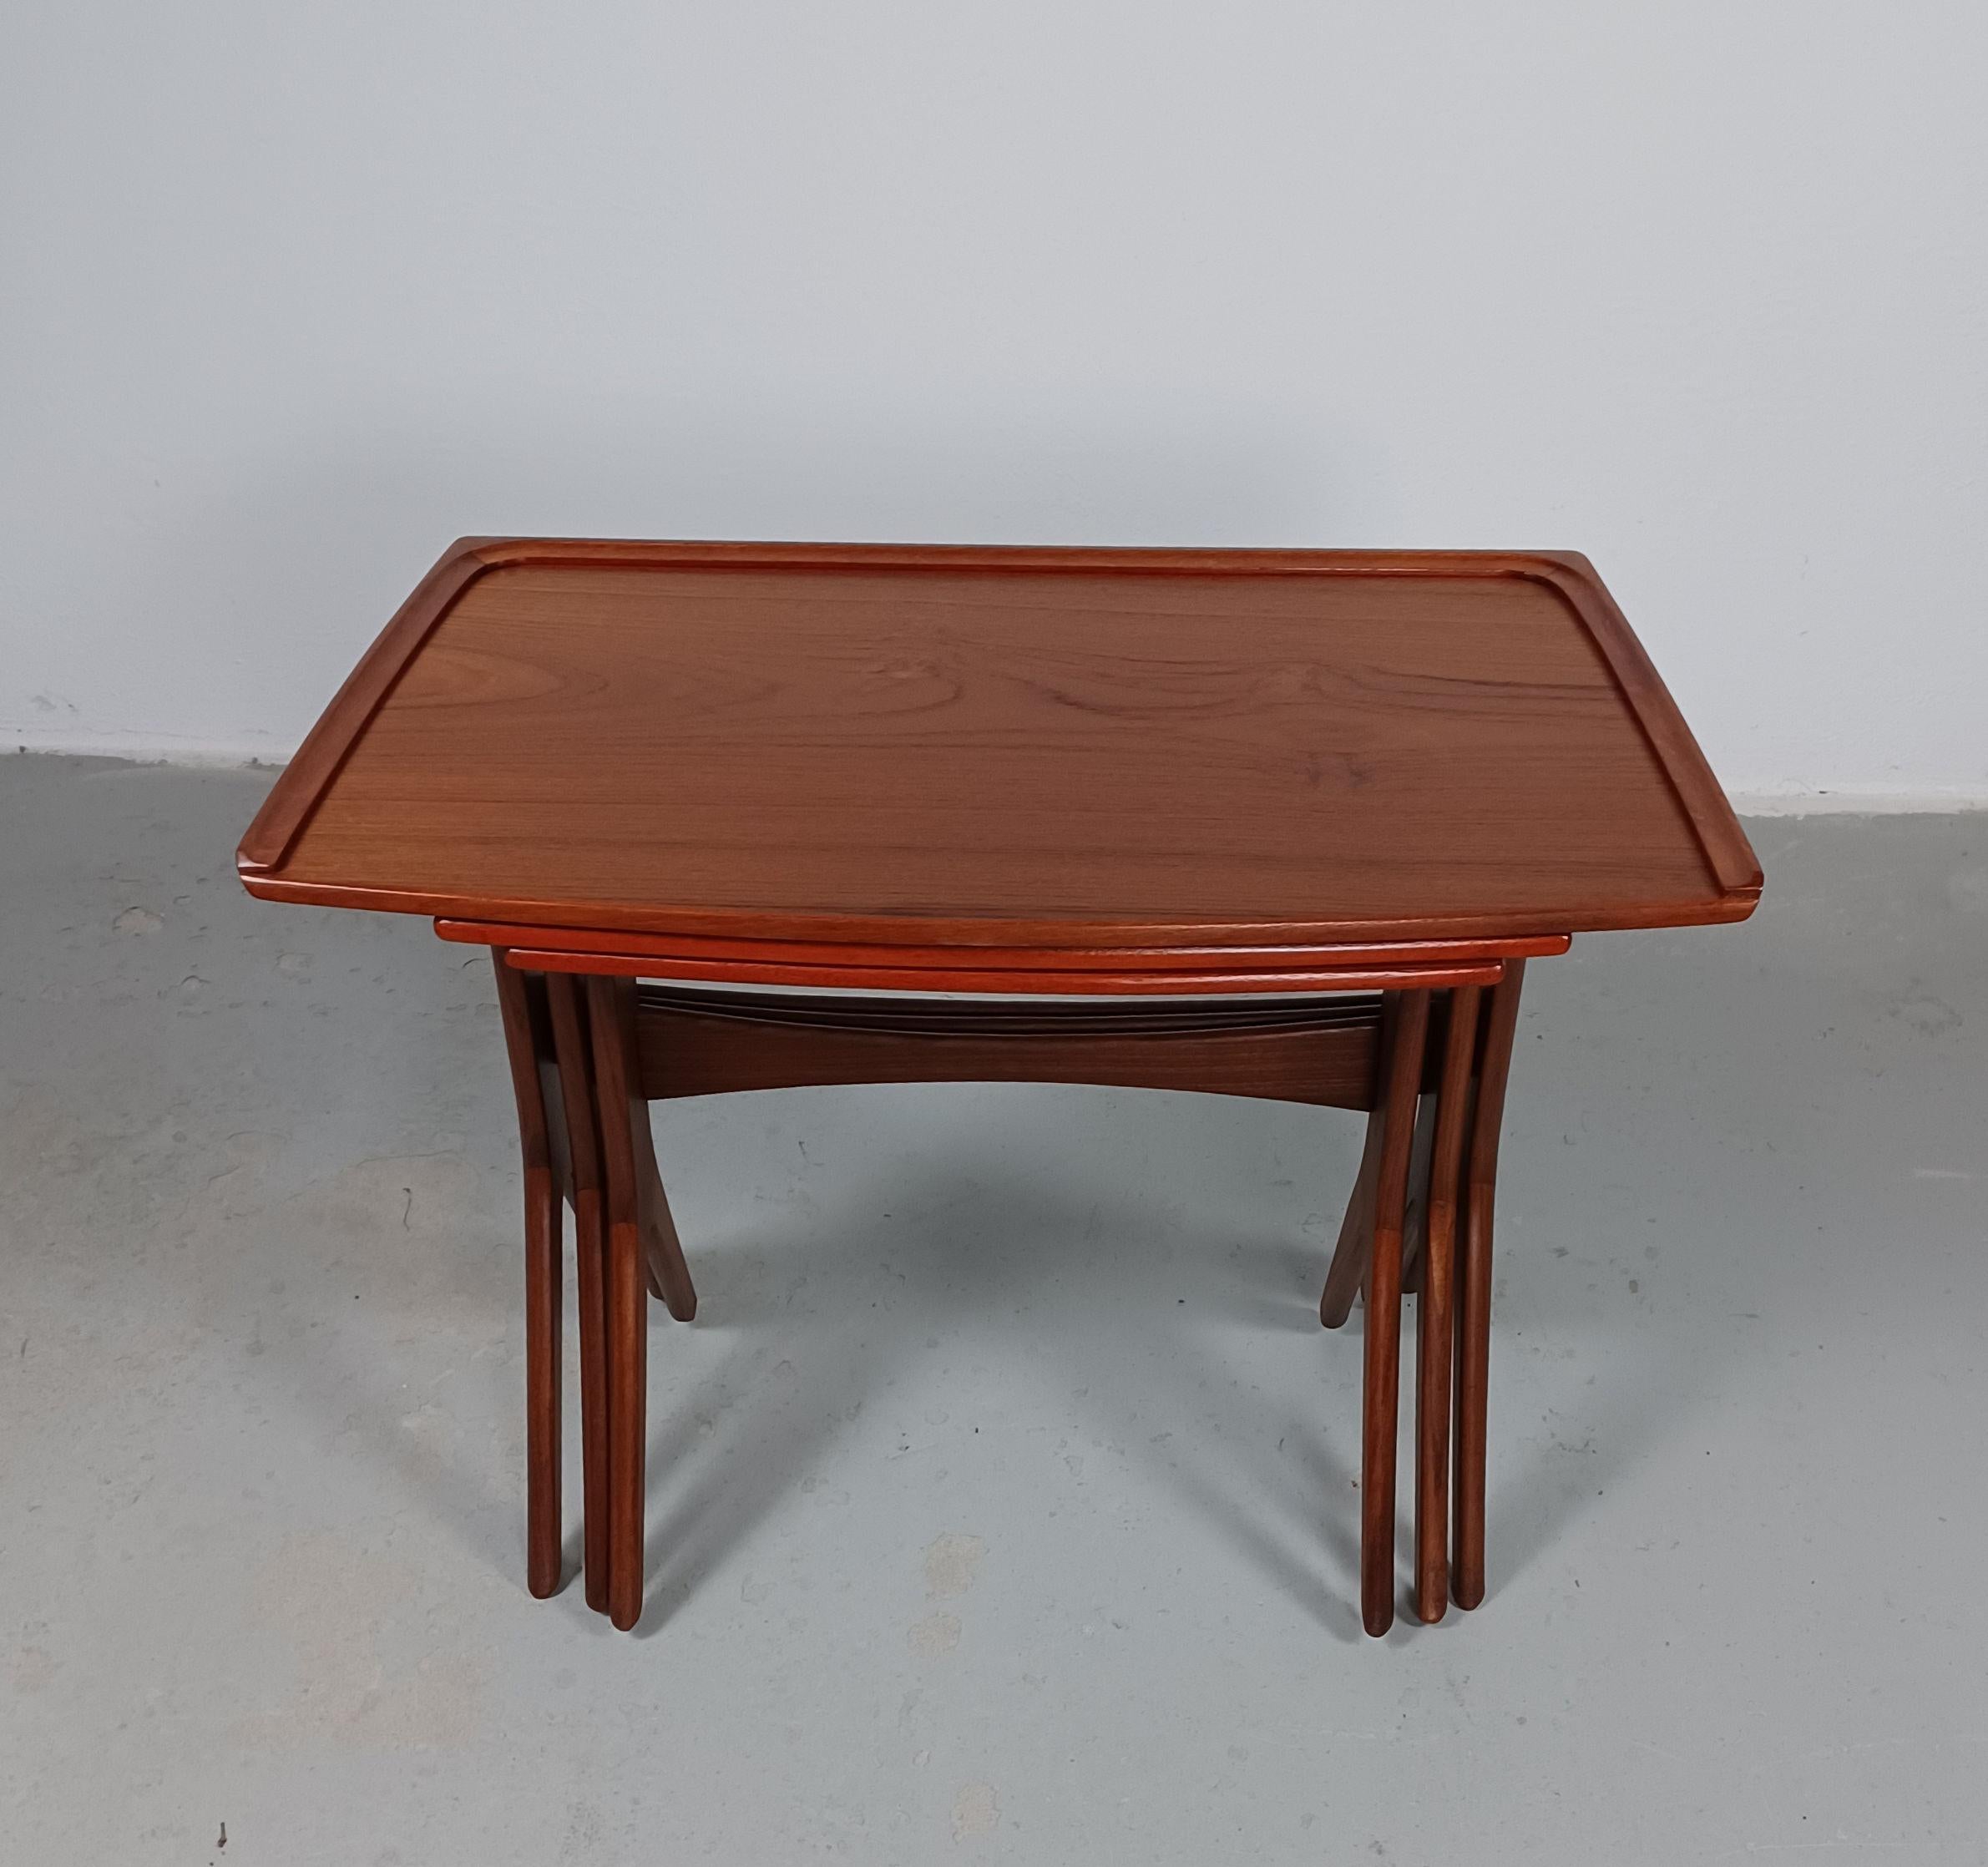 1960's Johannes Andersen restored set of Danish teak nesting tables by CFC Silkeborg.

The simple minimalistic yet well shaped, space conserving and practical easy to use nesting tables have been fully restored and refinished by our skilled and